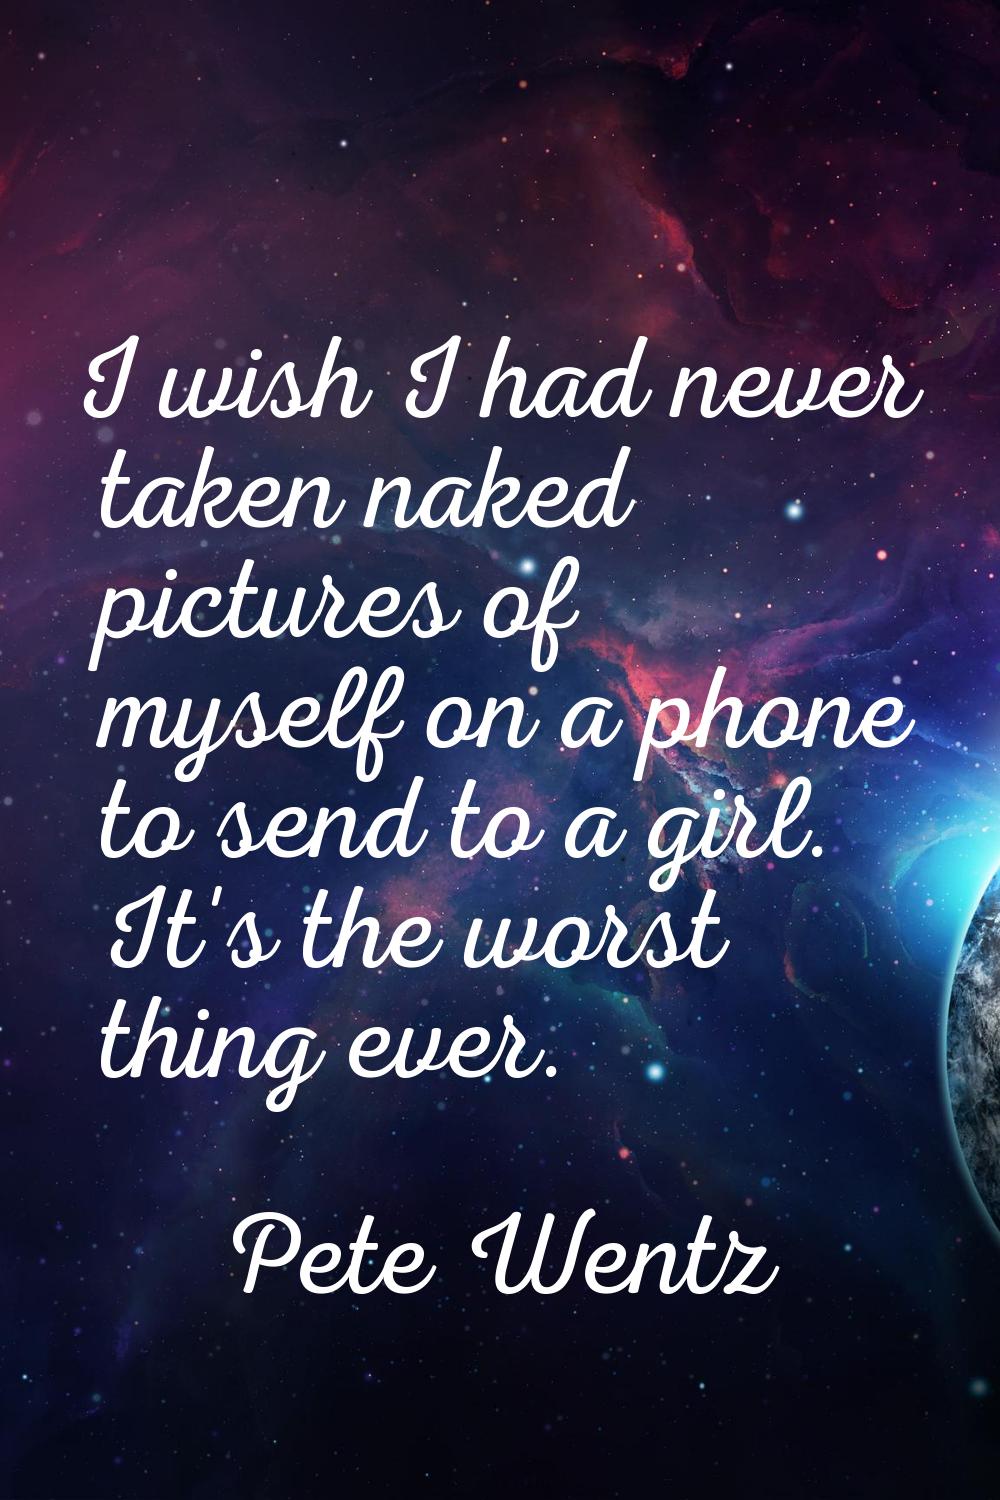 I wish I had never taken naked pictures of myself on a phone to send to a girl. It's the worst thin